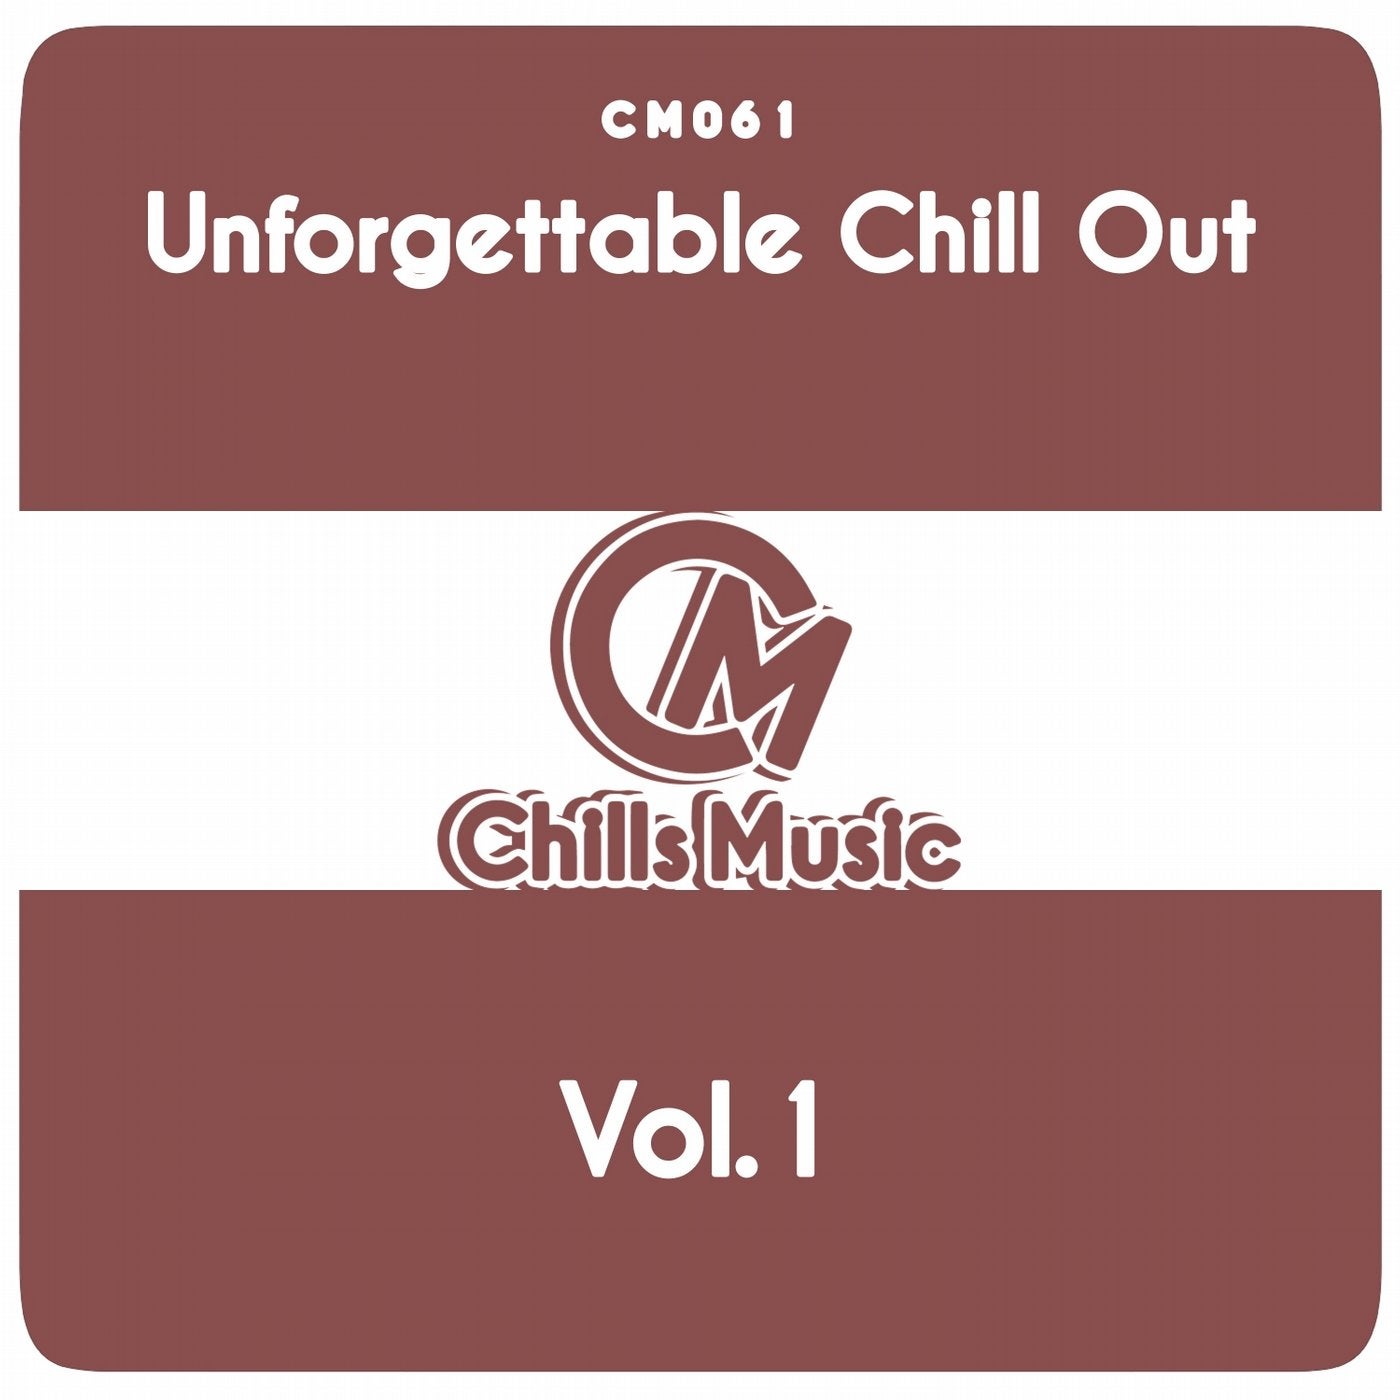 Unforgettable Chill Out, Vol. 1